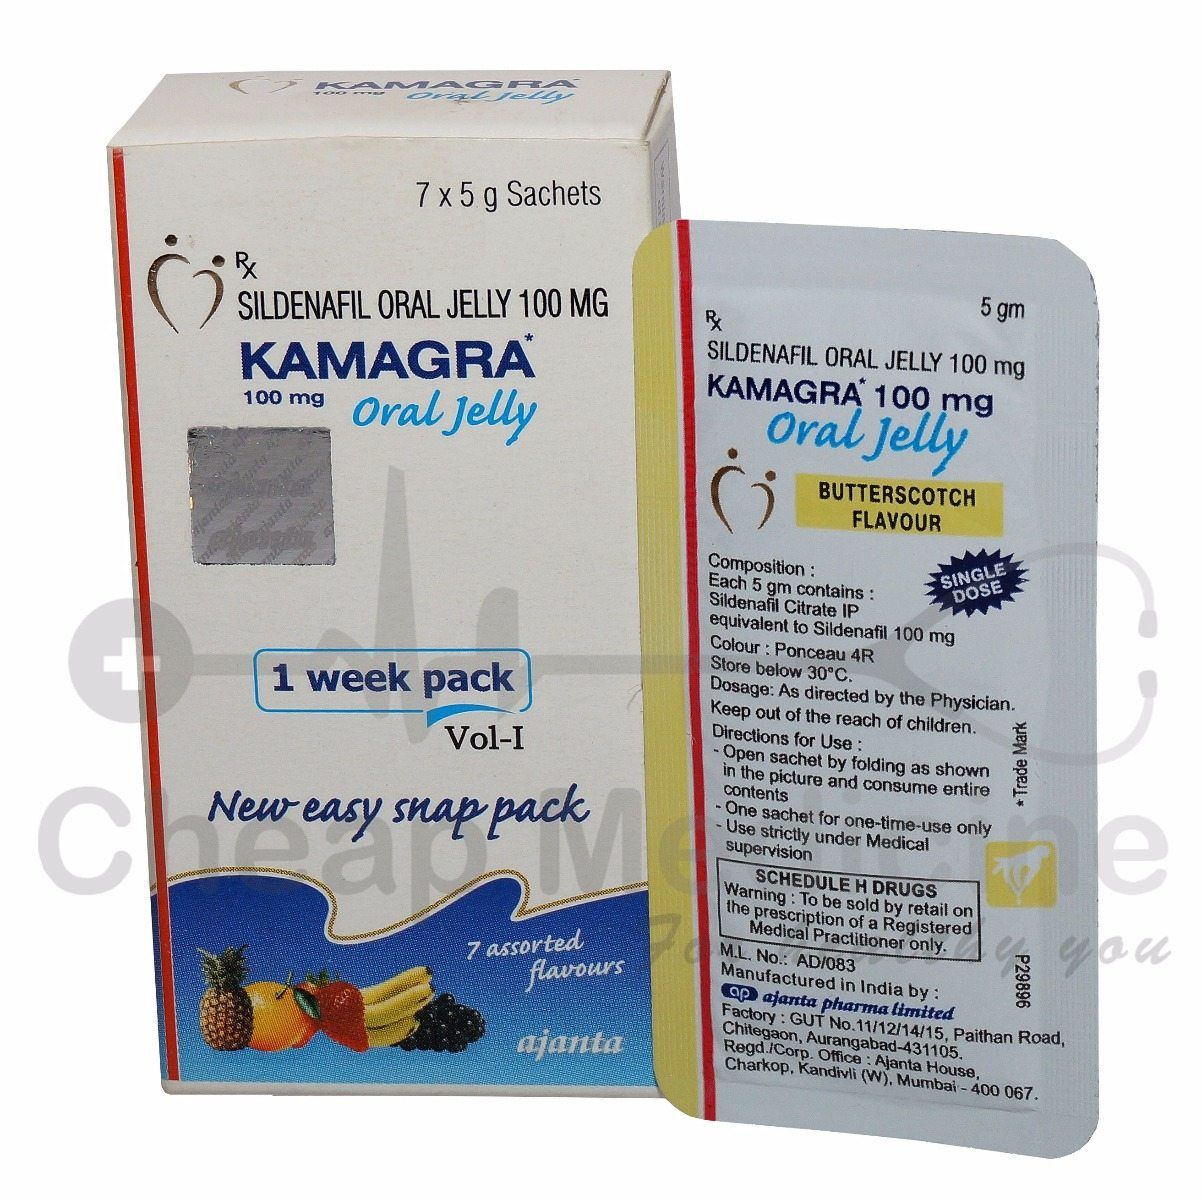 Kamagra Oral Jelly Not Working